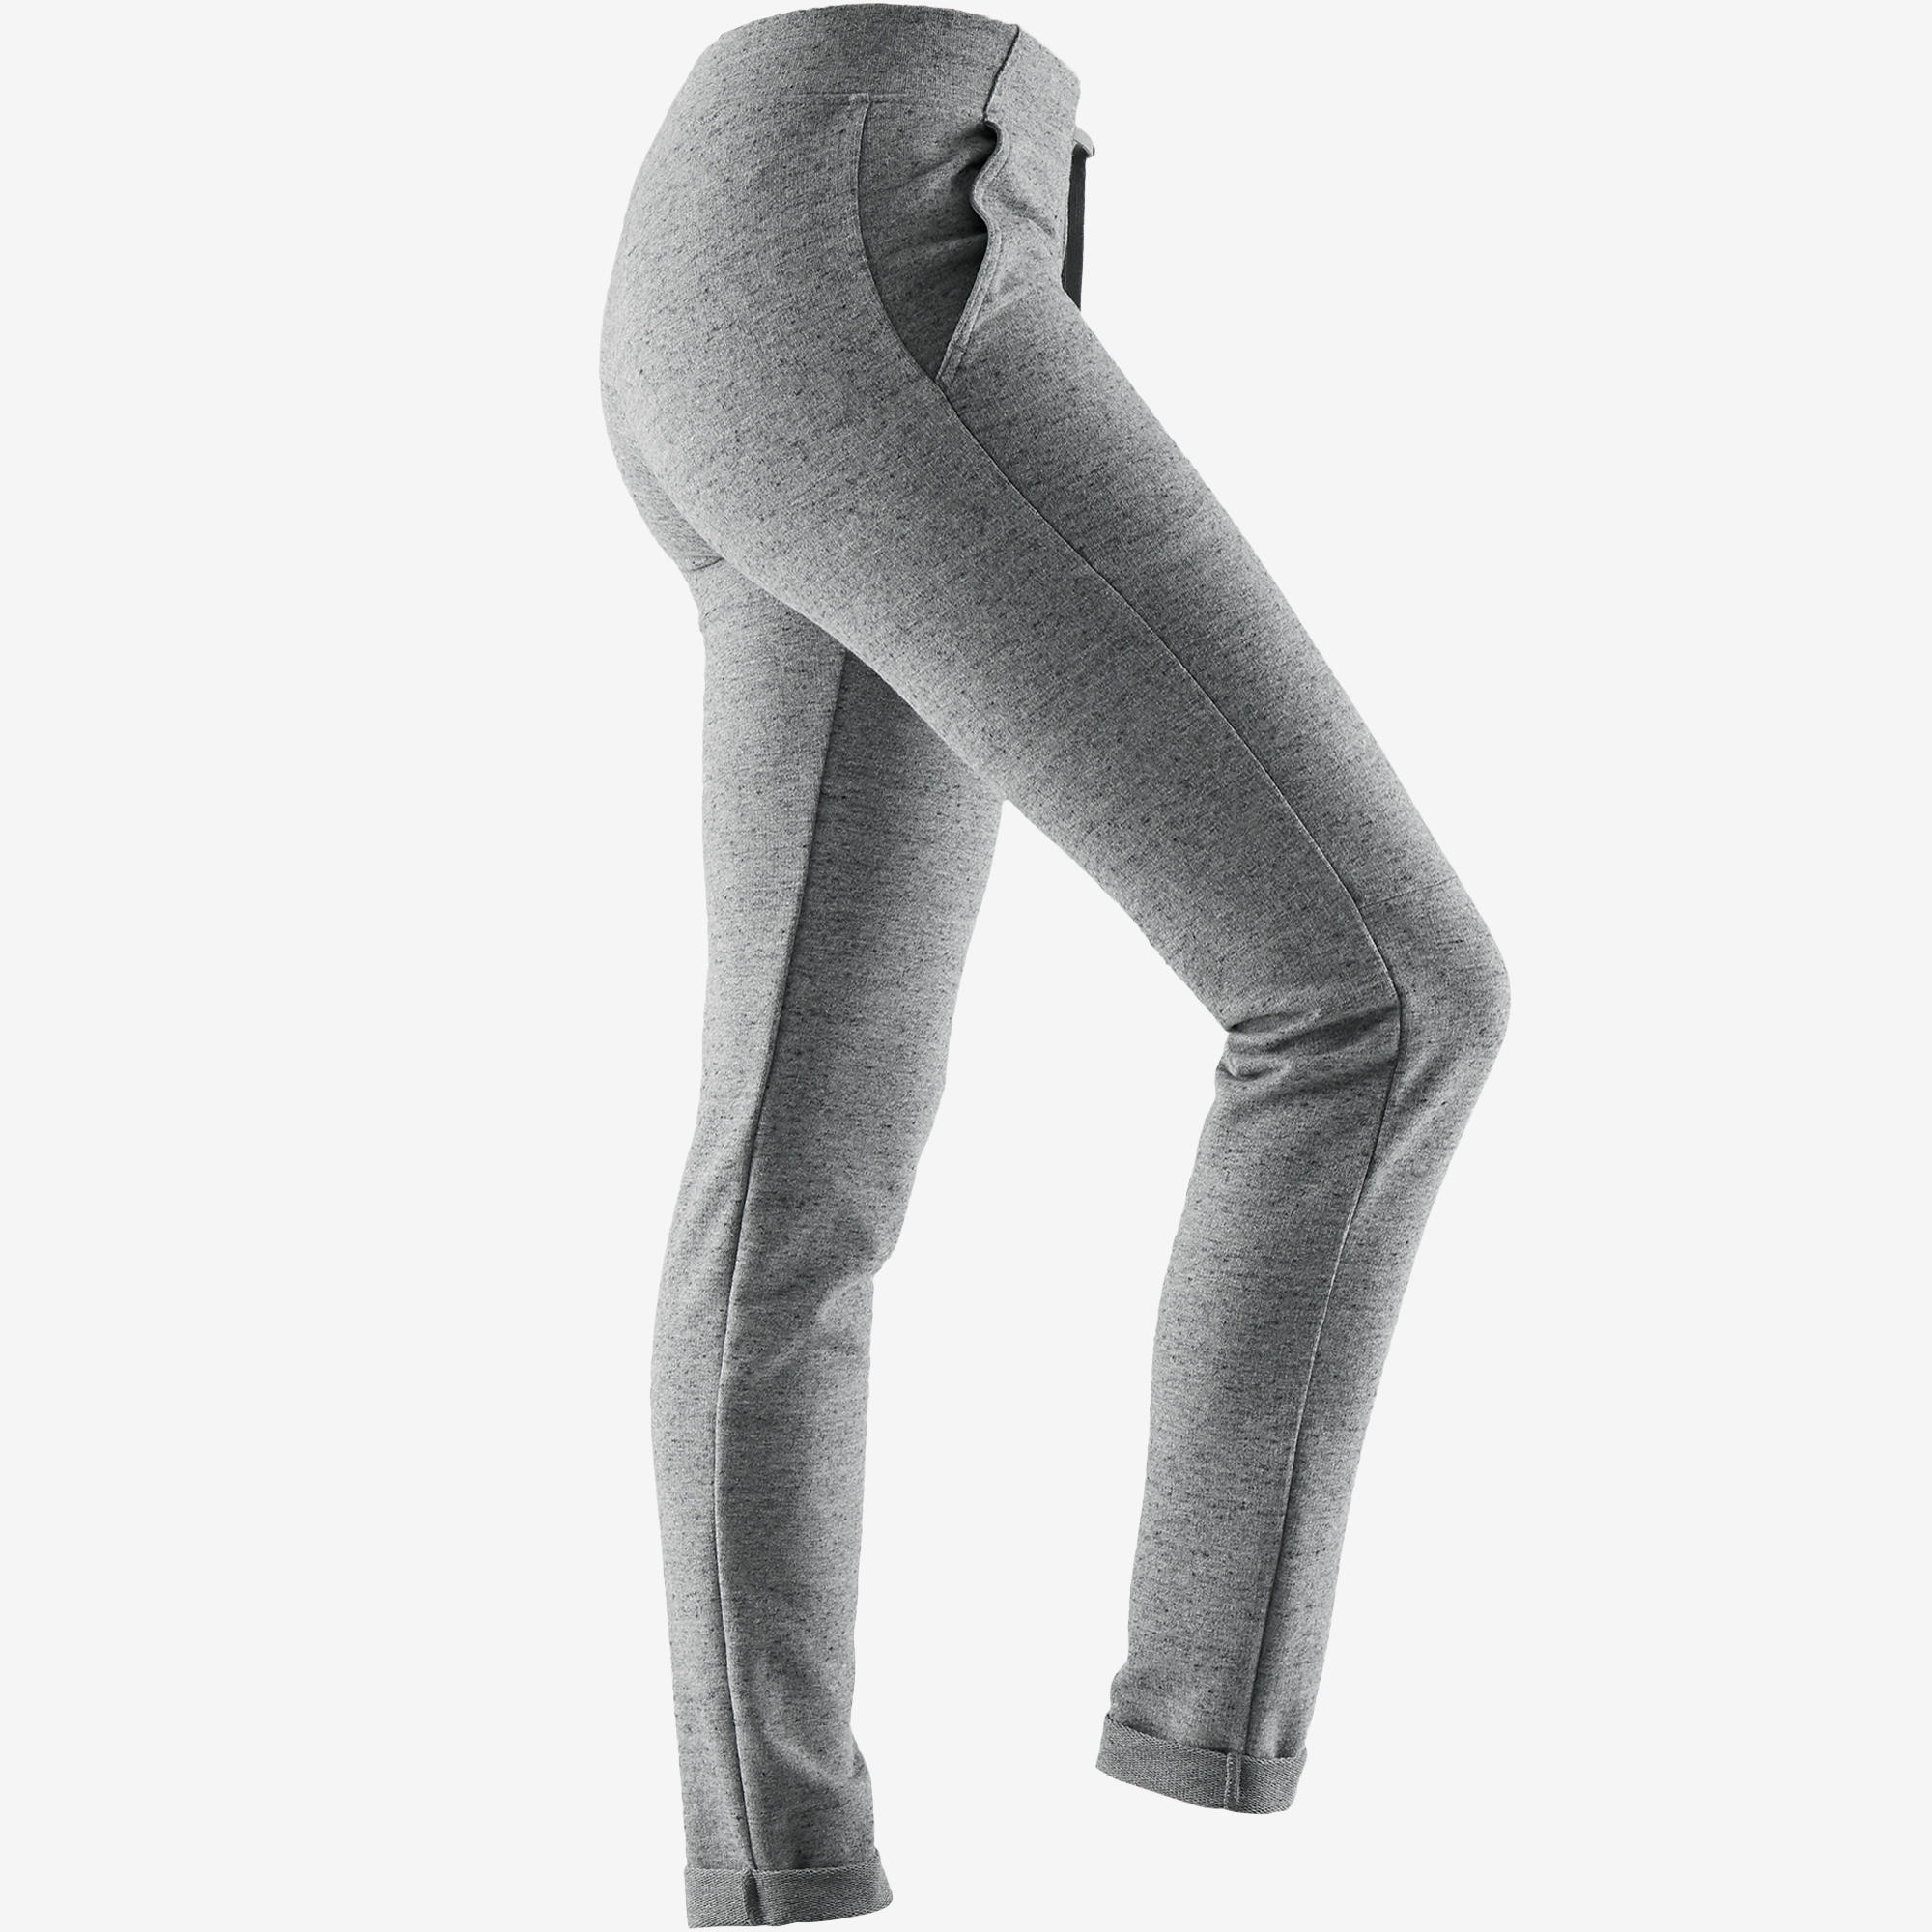 Women's Trousers | Buy Trousers & Pants for Womens | Free Shipping